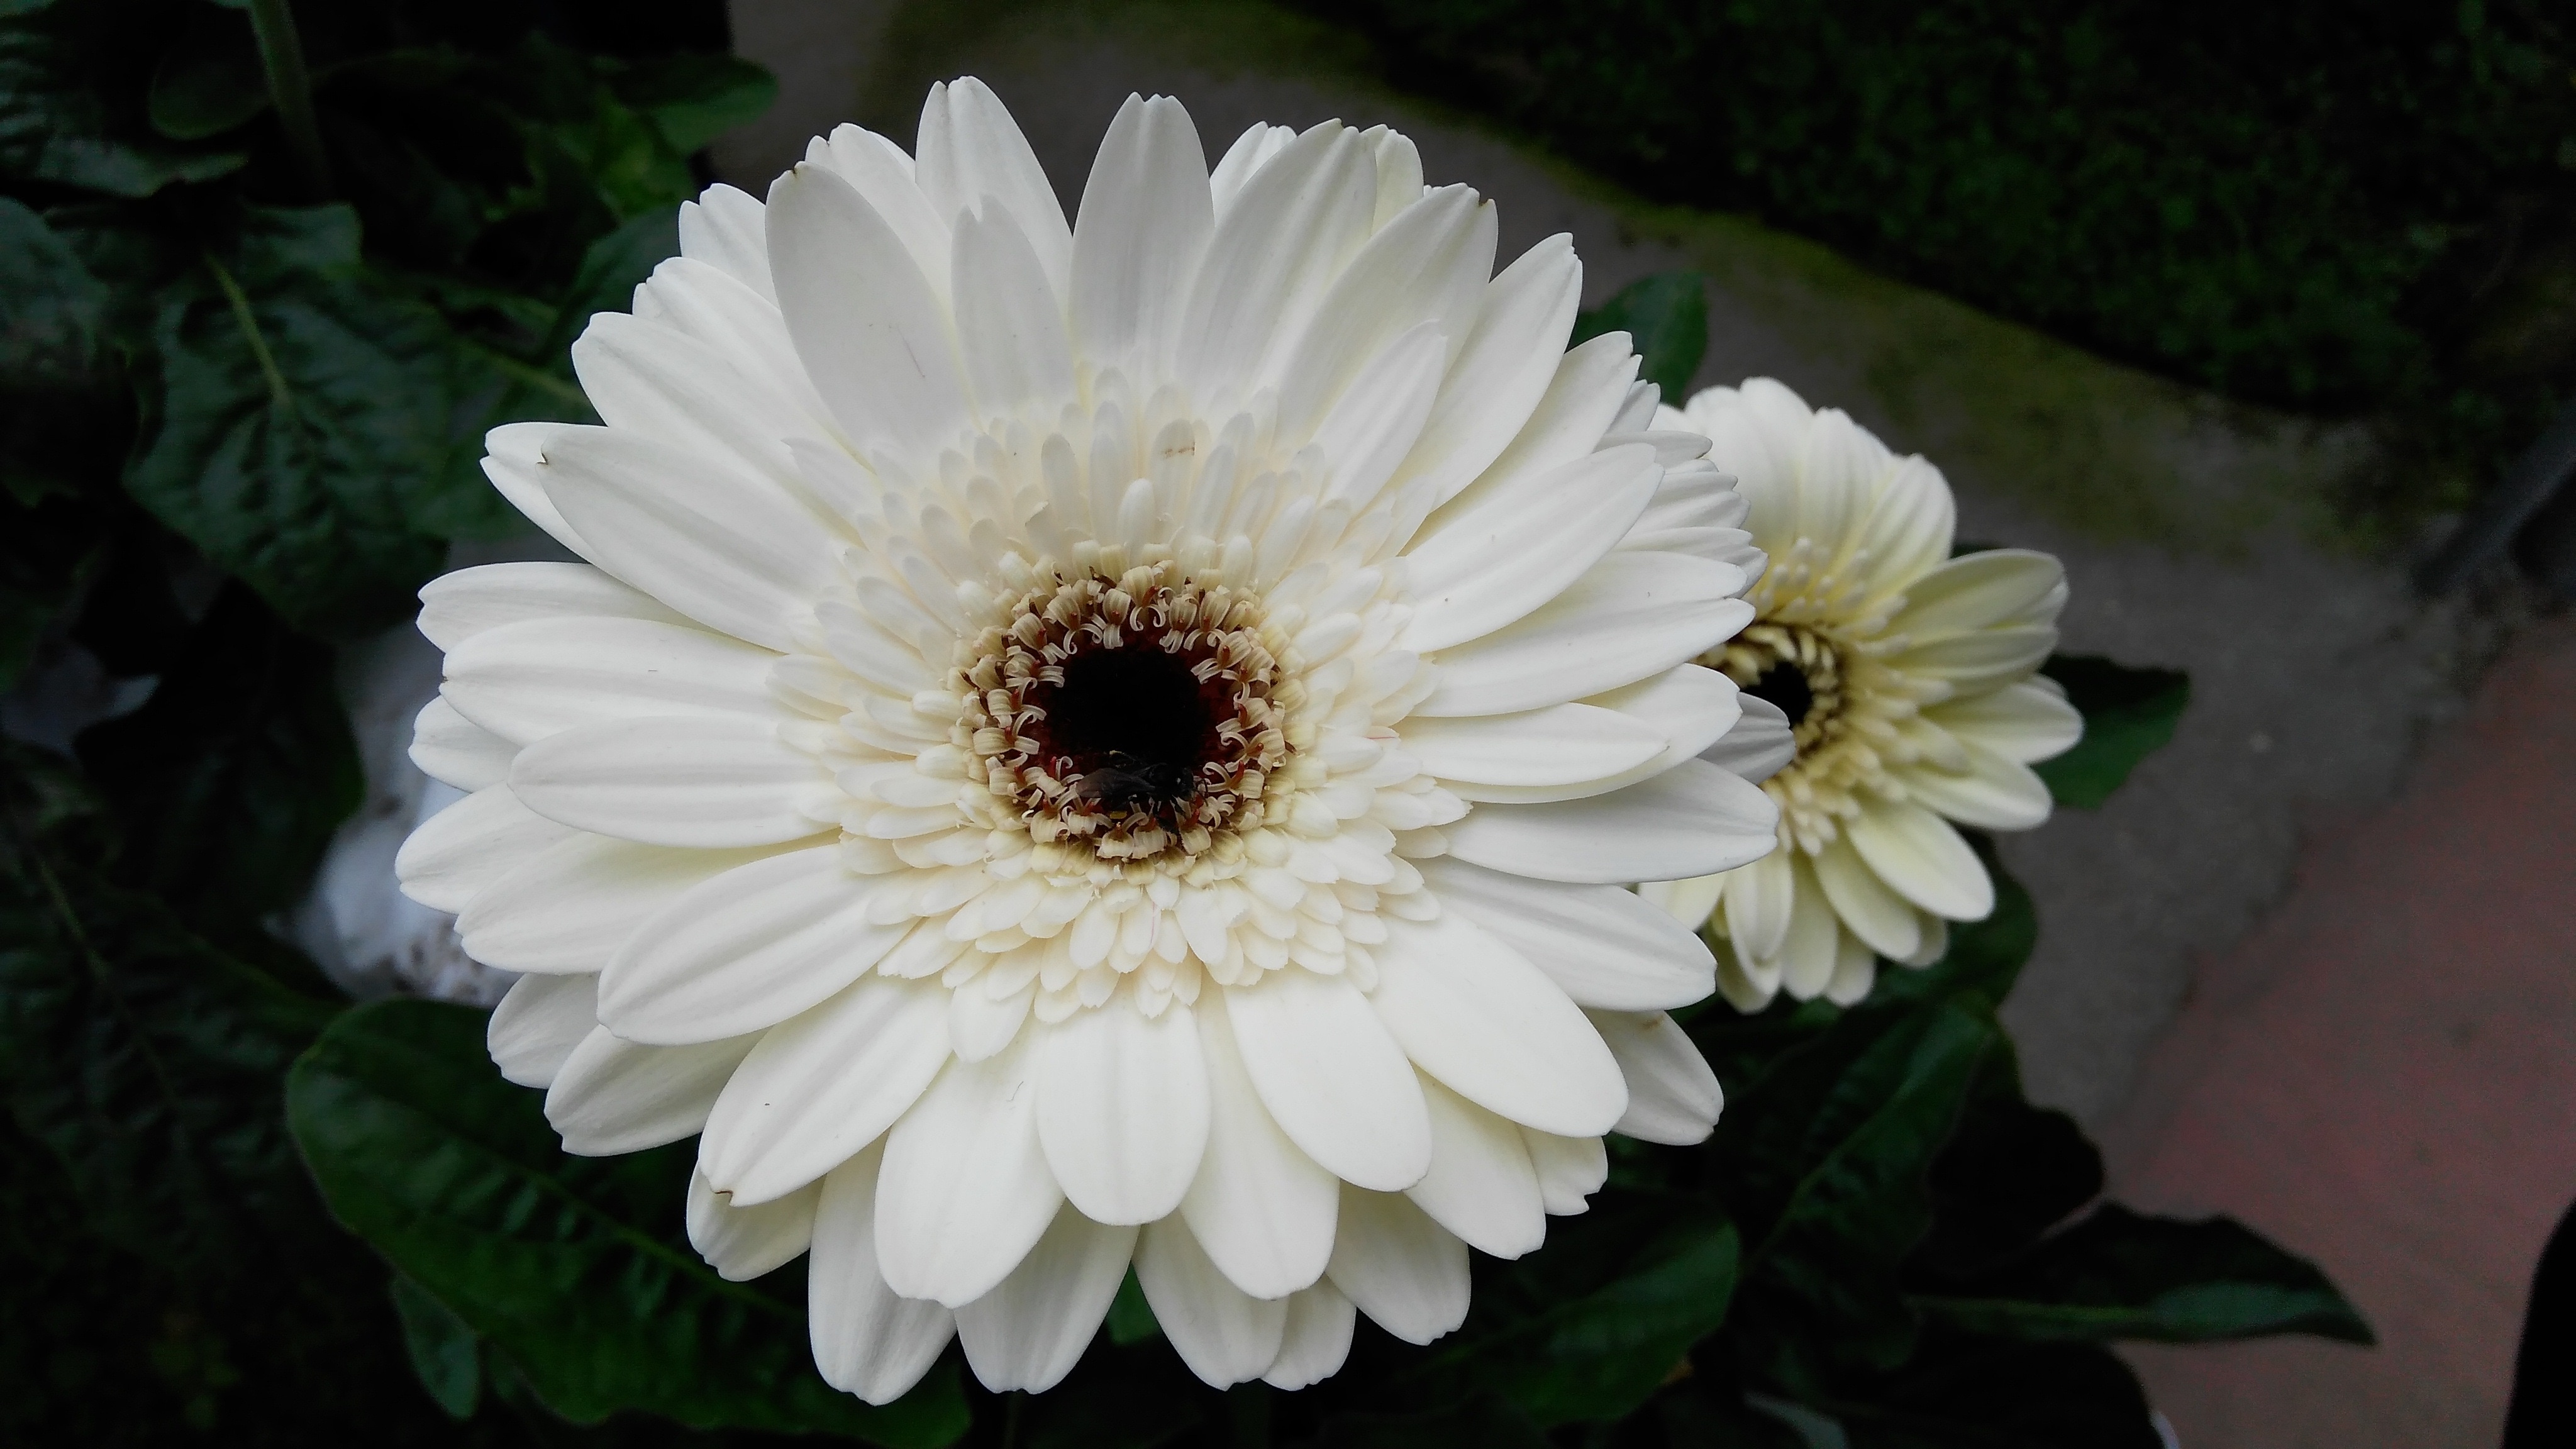 2 white clustered flowers